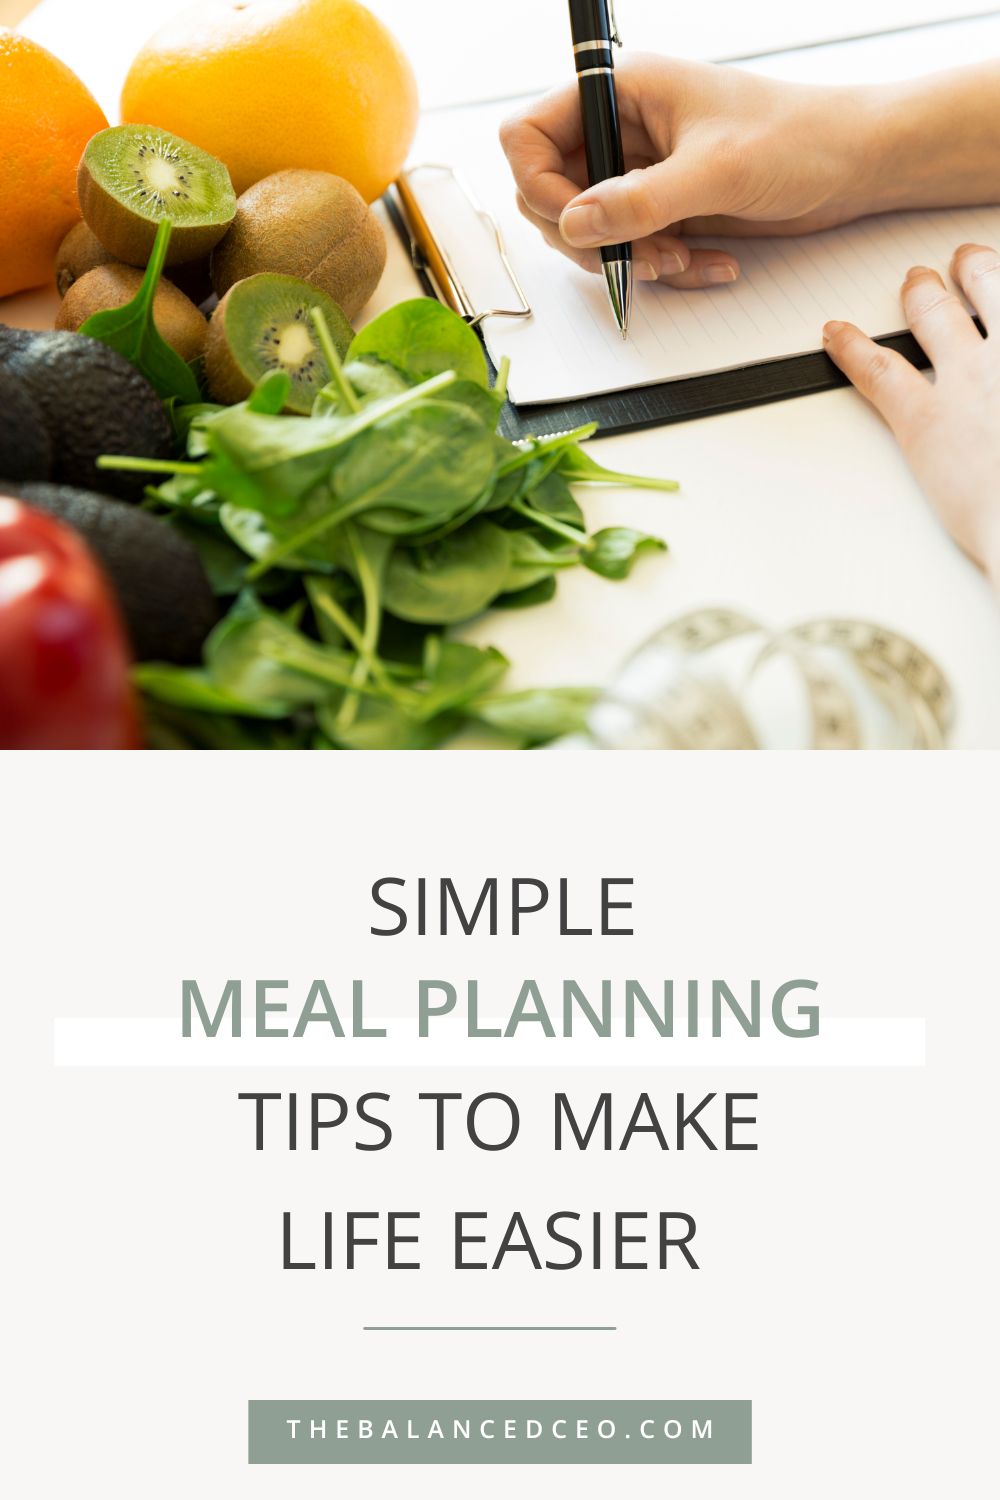 Simple Meal Planning Tips to Make Life Easier